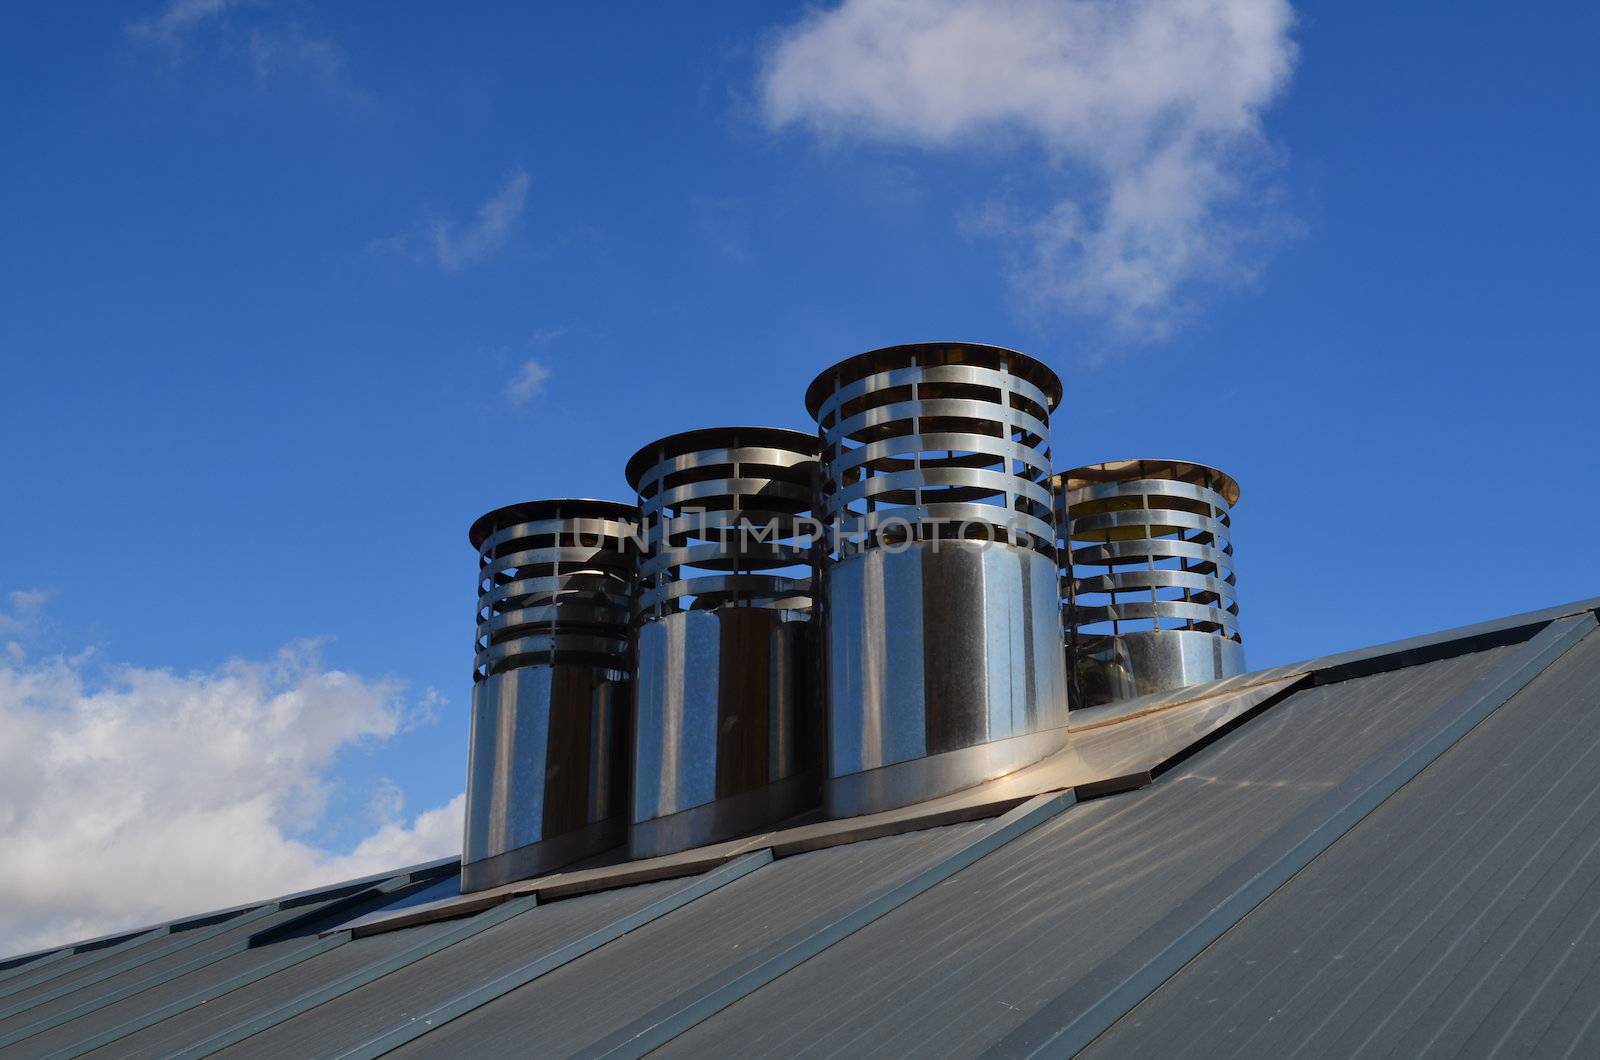 Roof ventilation chimneys by bunsview